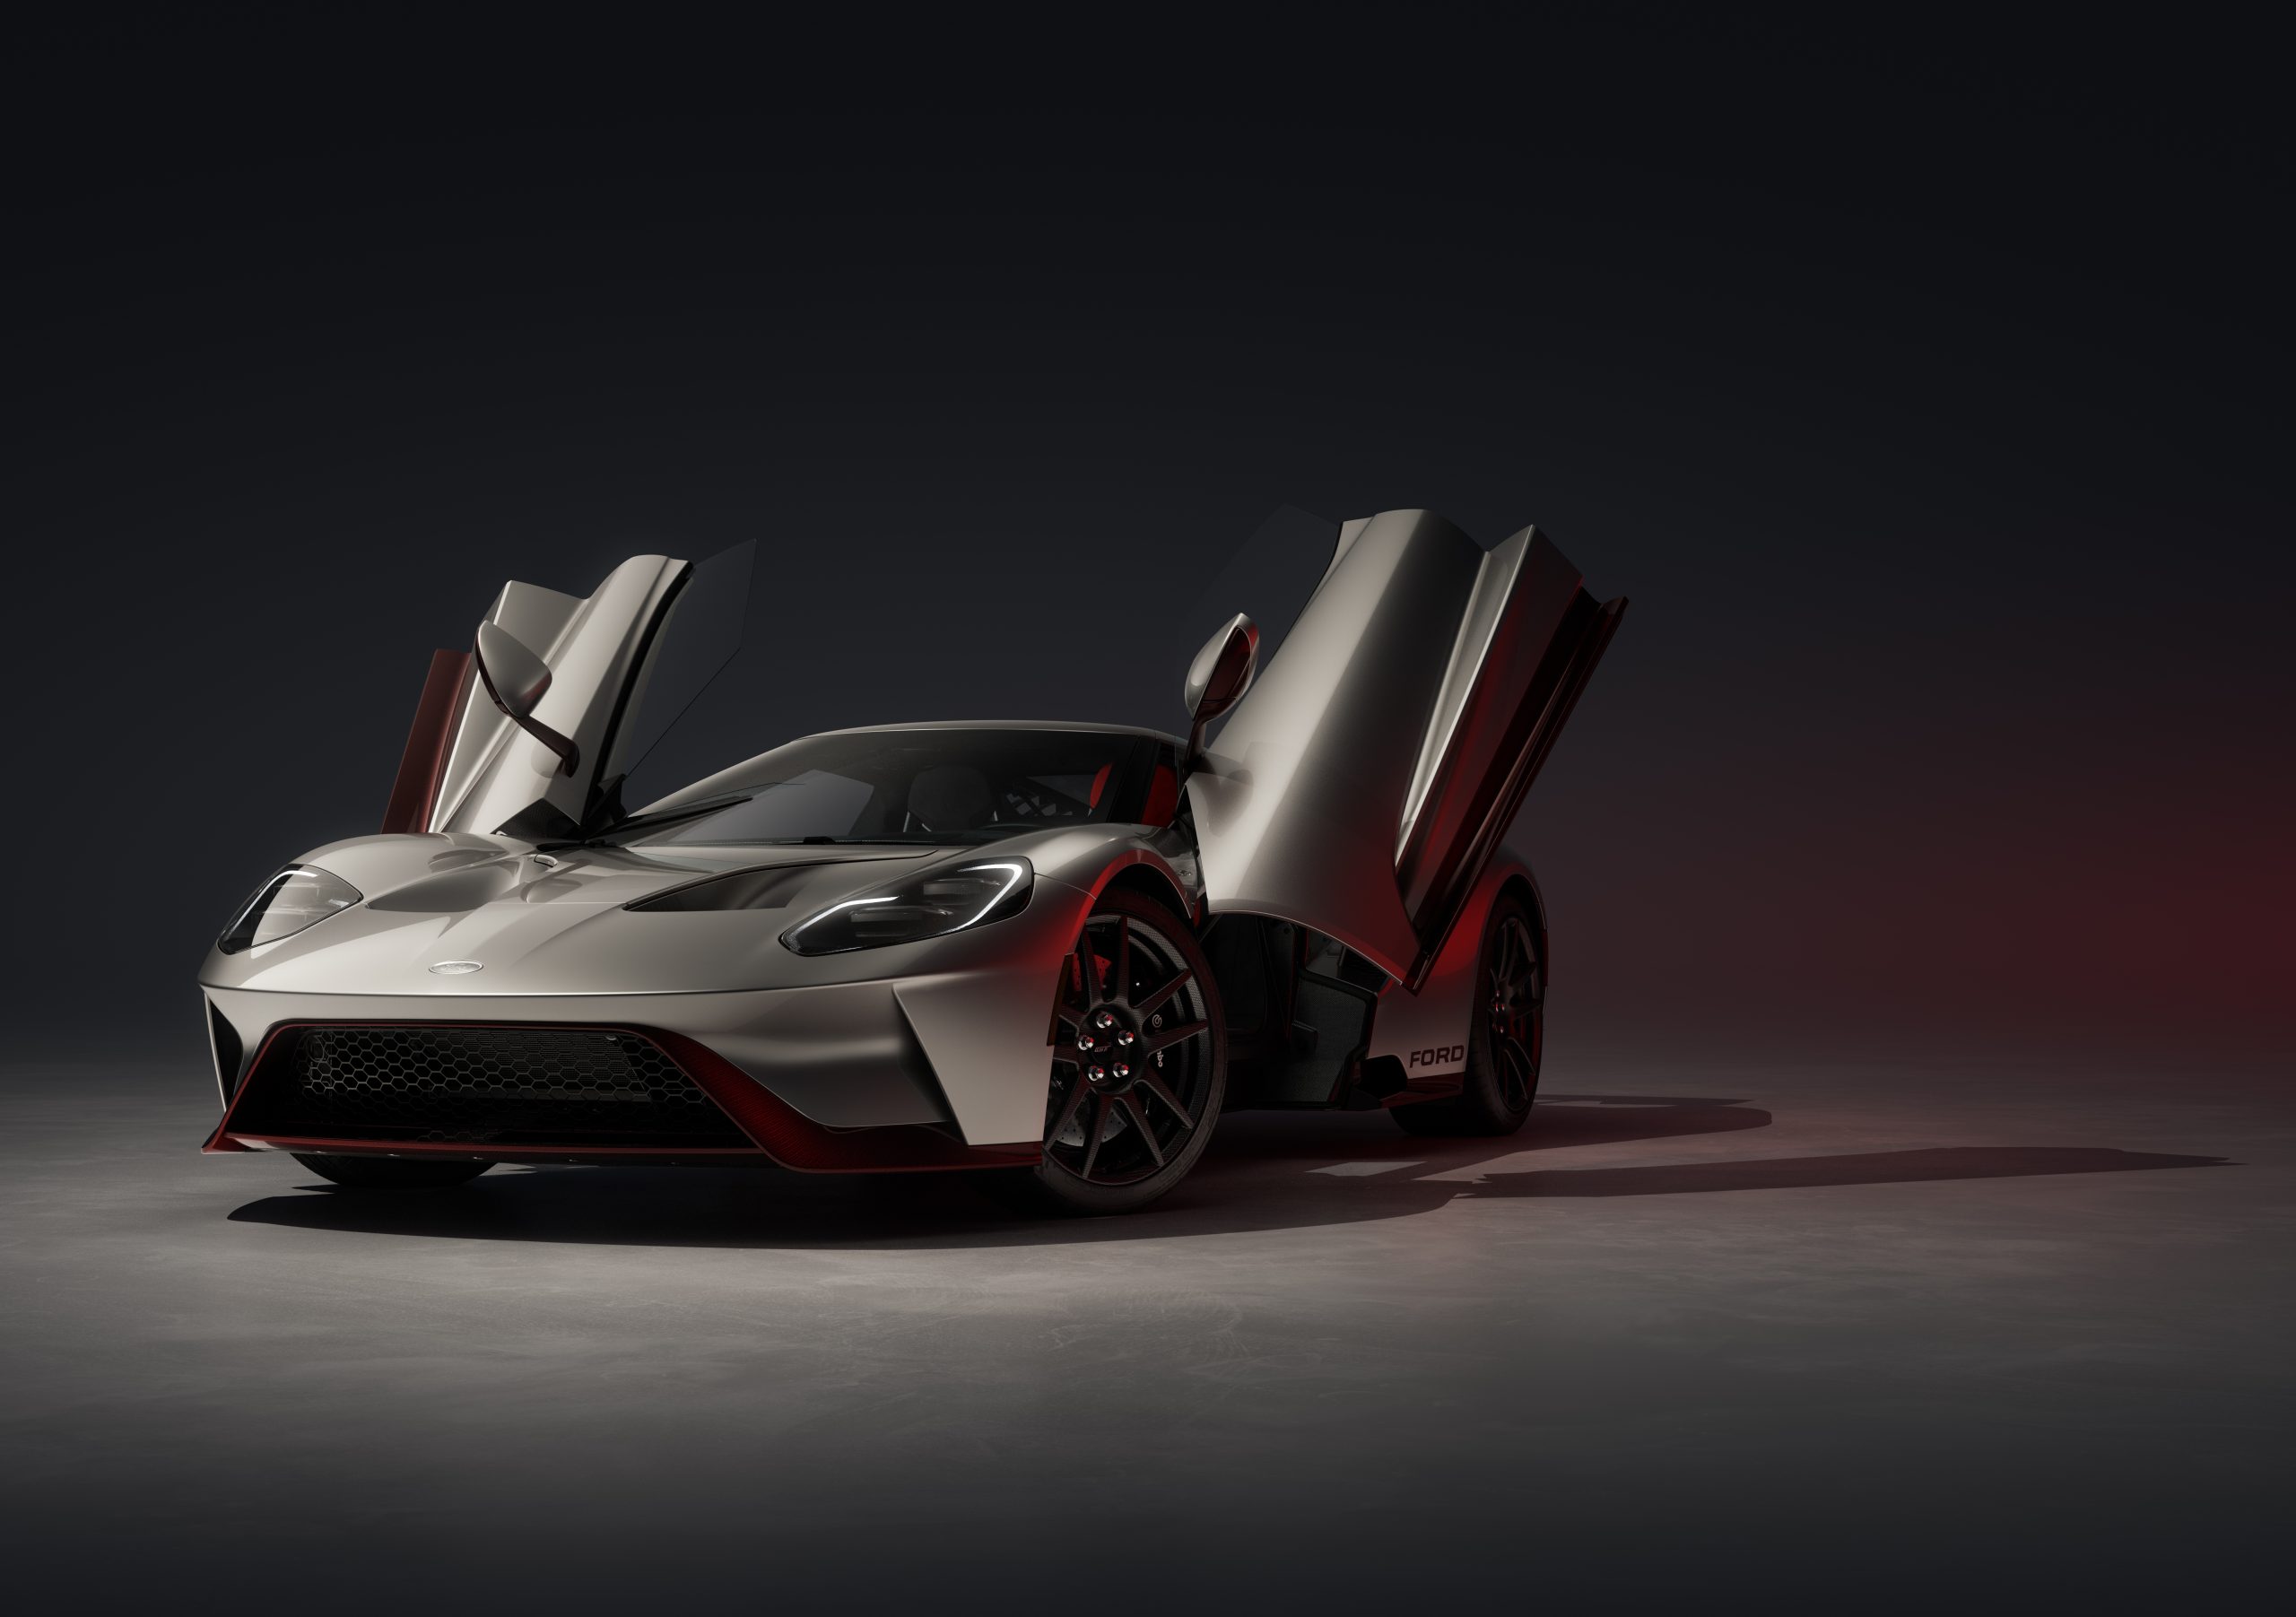 Titanium 3D printing used to build Le Mans-inspired last hurrah for the Ford GT